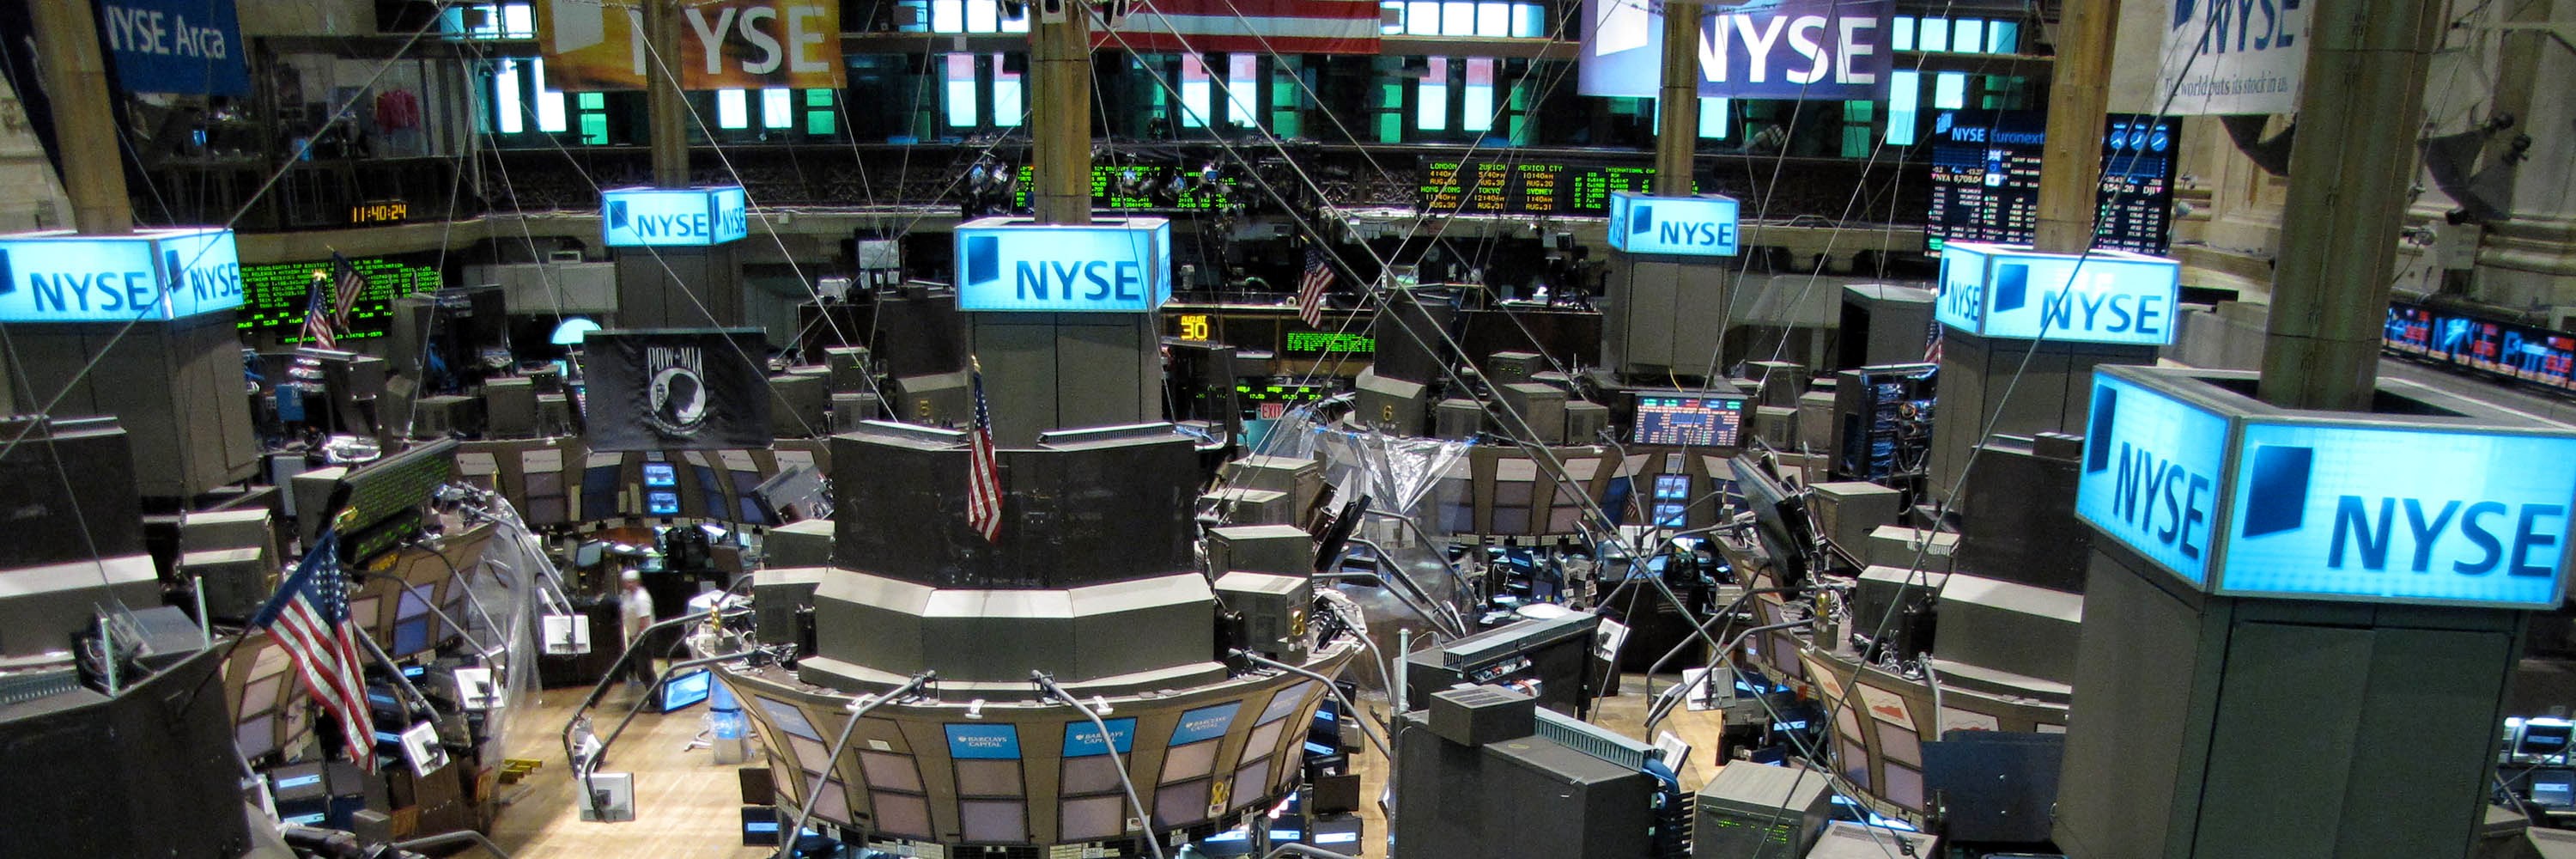 New York Stock Exchange trading floor. Photo: Kevin Hutchinson/Wikimedia Commons, Creative Commons Attribution 2.0 Generic Licence